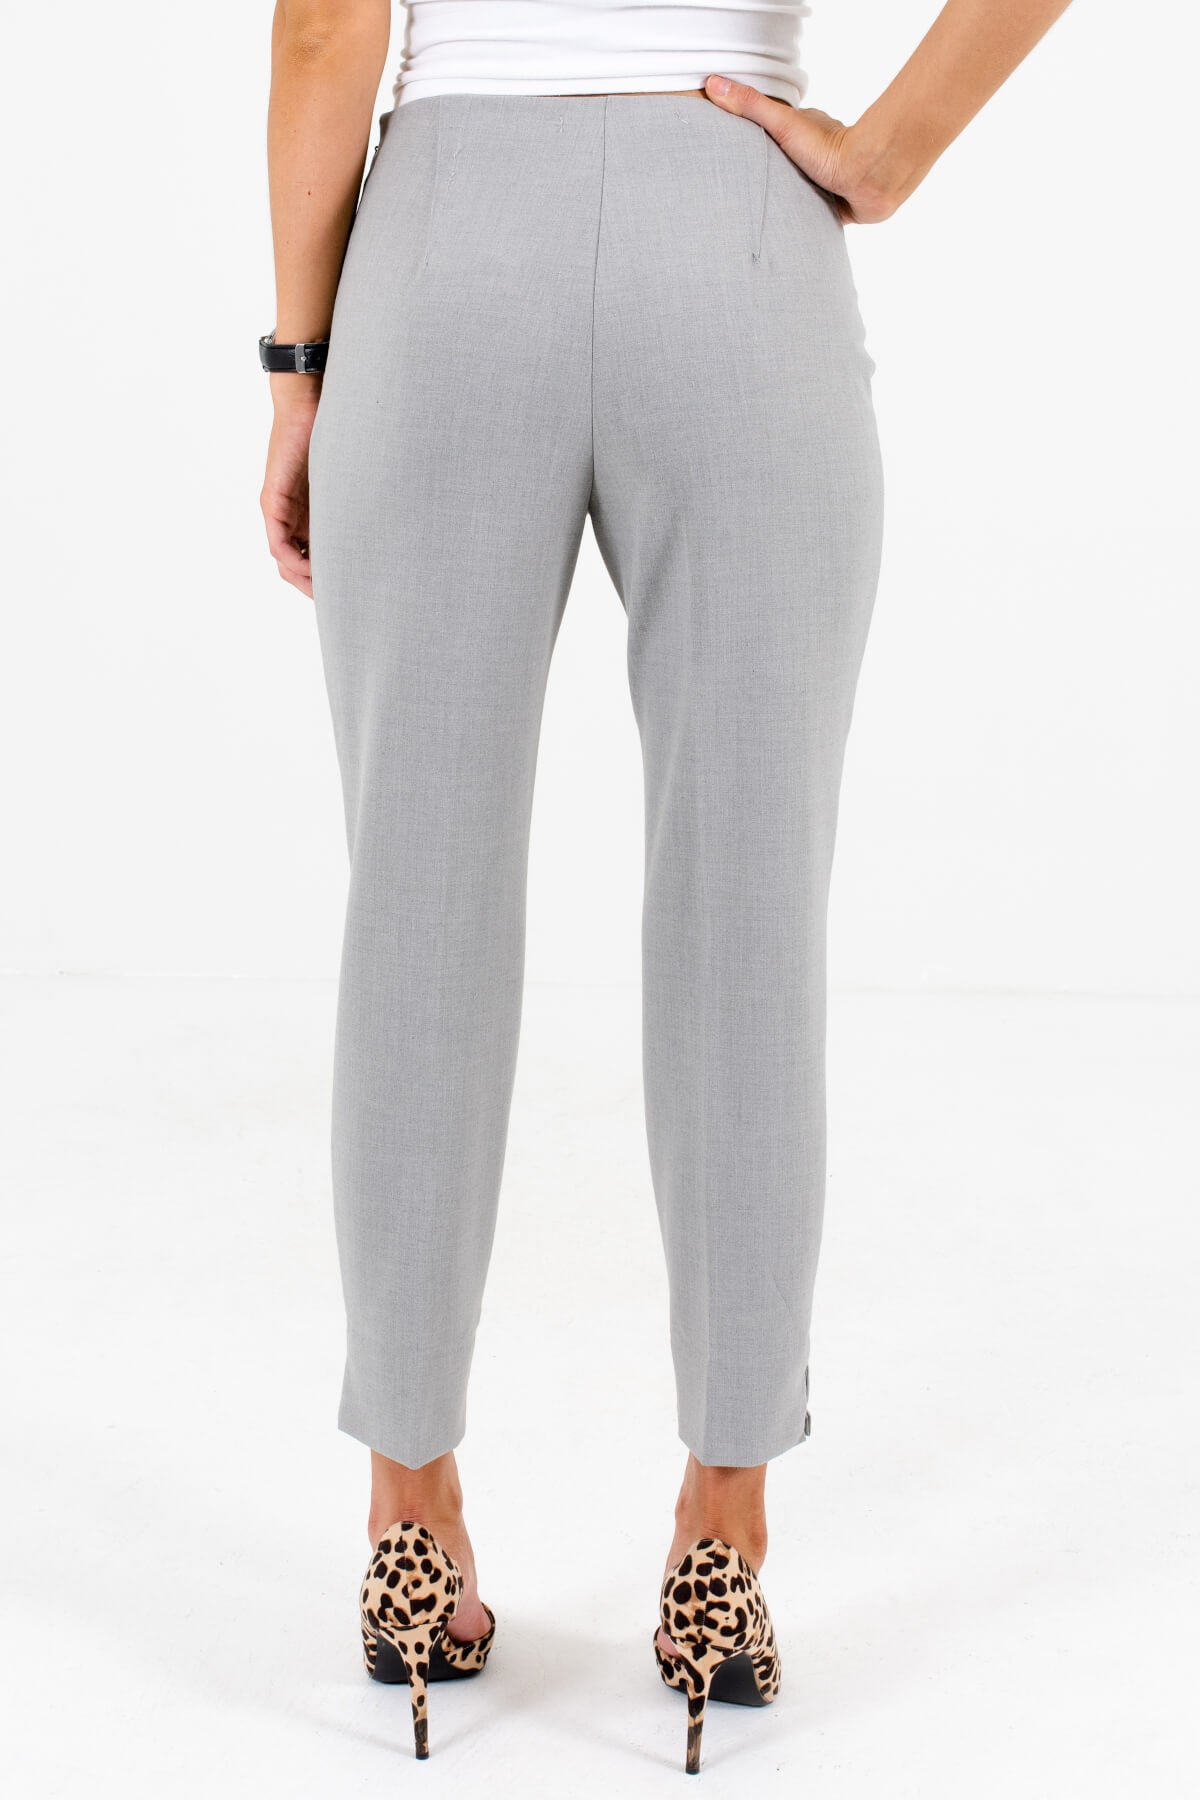 Discover more than 240 grey trousers women latest